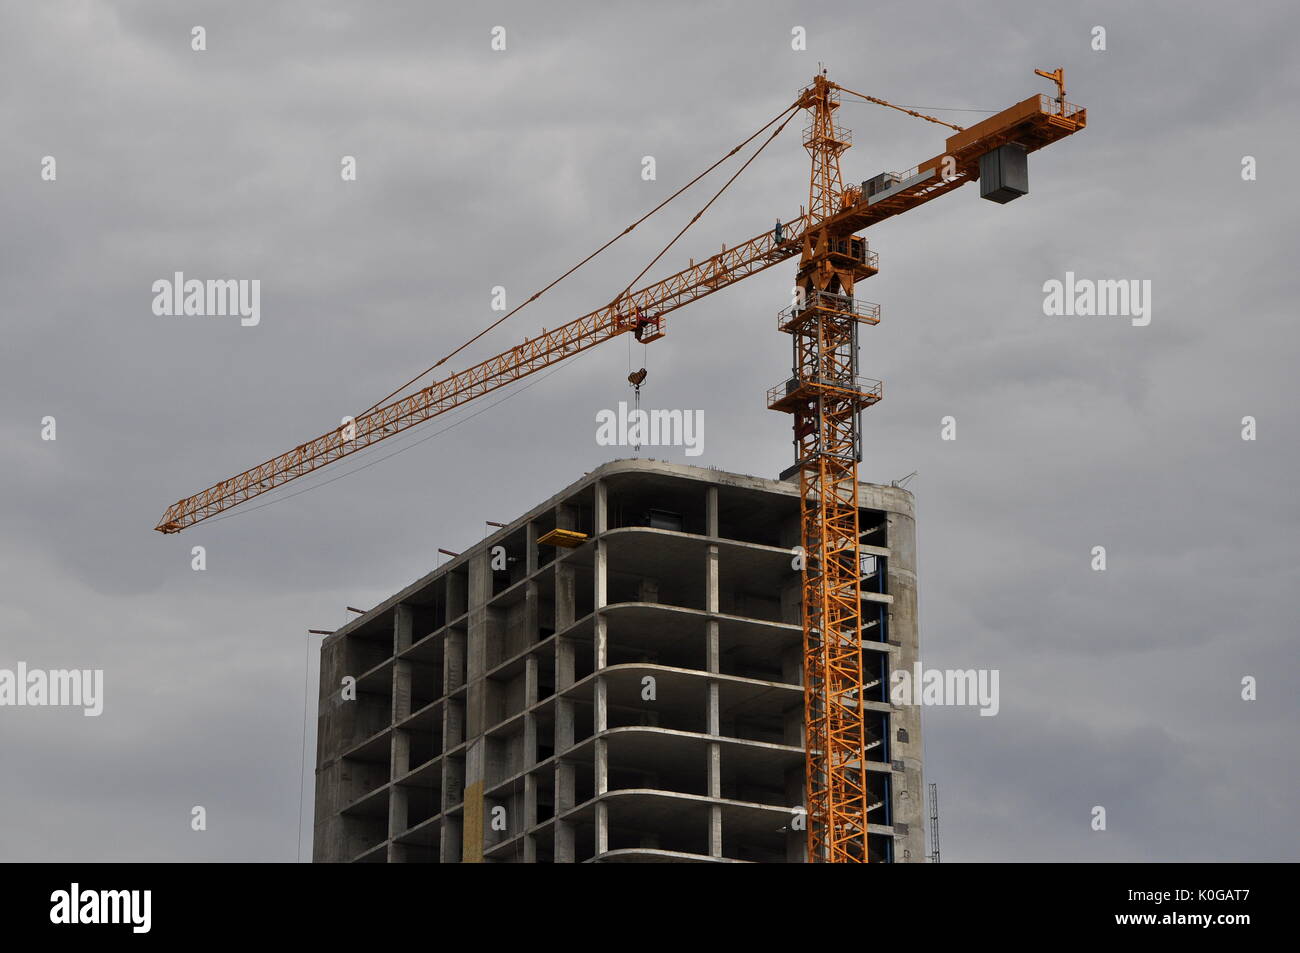 Upper part of a constructed tall building with a tower crane jib over the roof against dramatic cloudy sky. Stock Photo